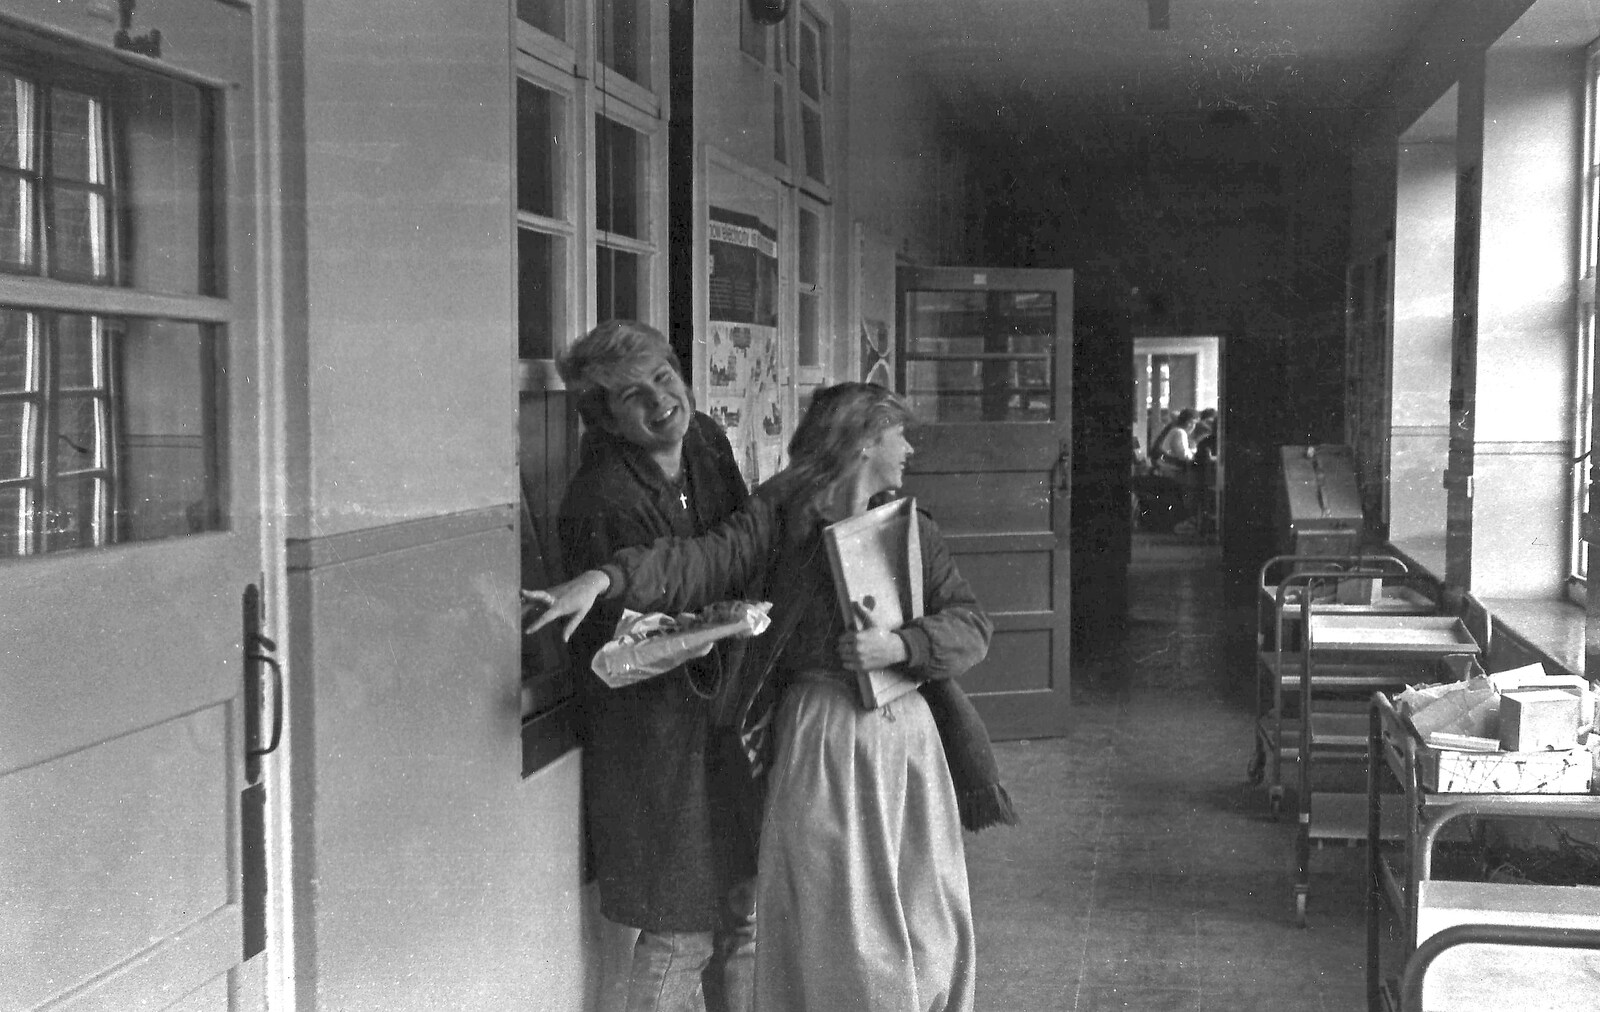 Jo Funnel and a friend outside the physics classroom from Learning Black-and-White Photography, Brockenhurst College, Hampshire - 10th March 1985